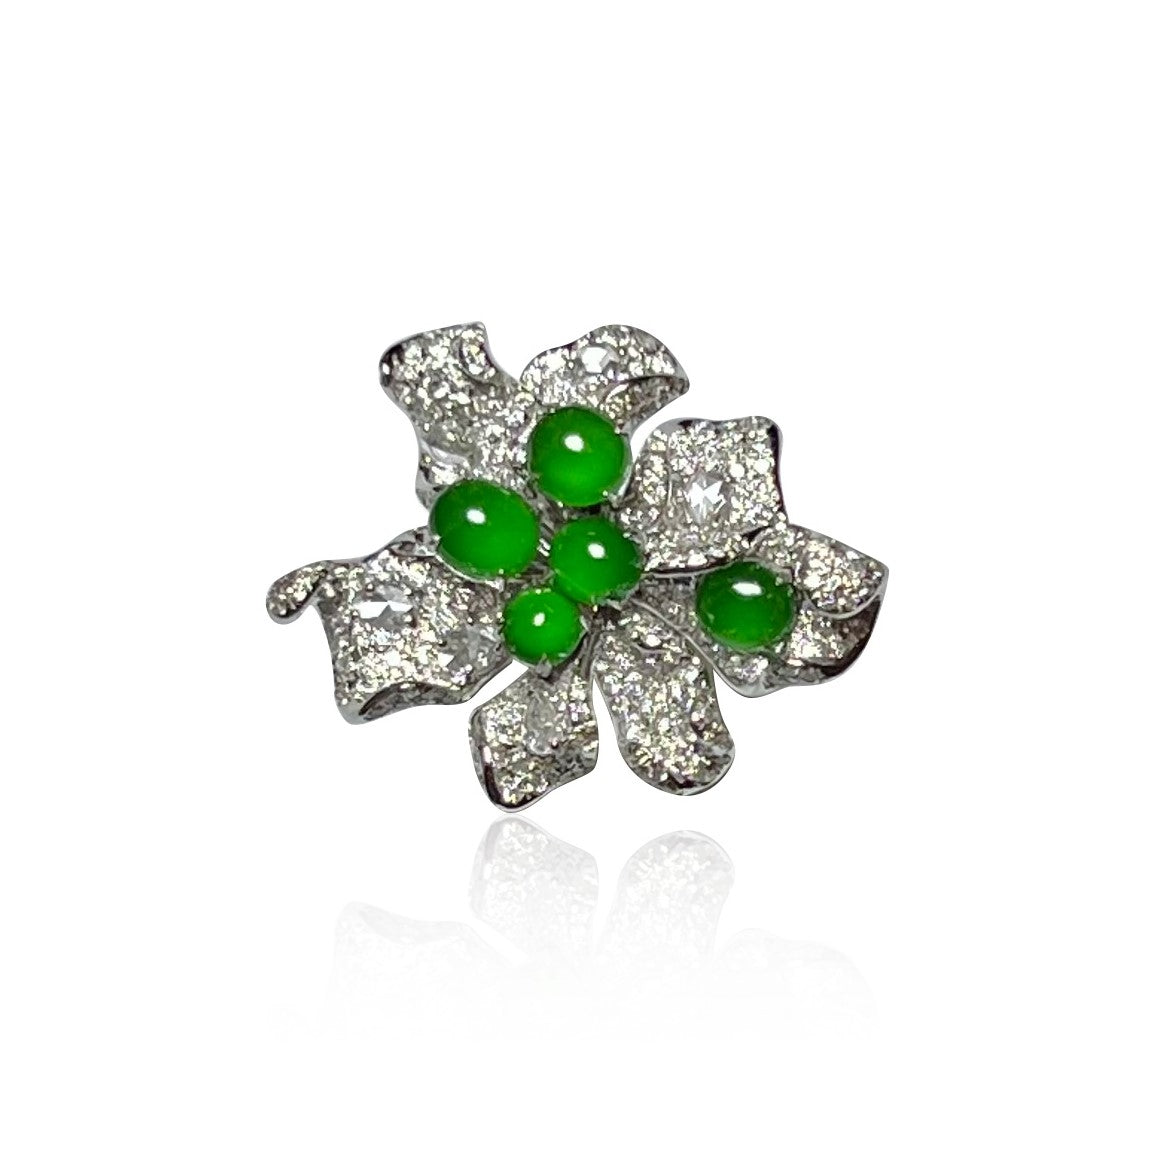 FIRE LILY JADEITE CABOCHON RING IN 18K WHITE GOLD AND DIAMOND